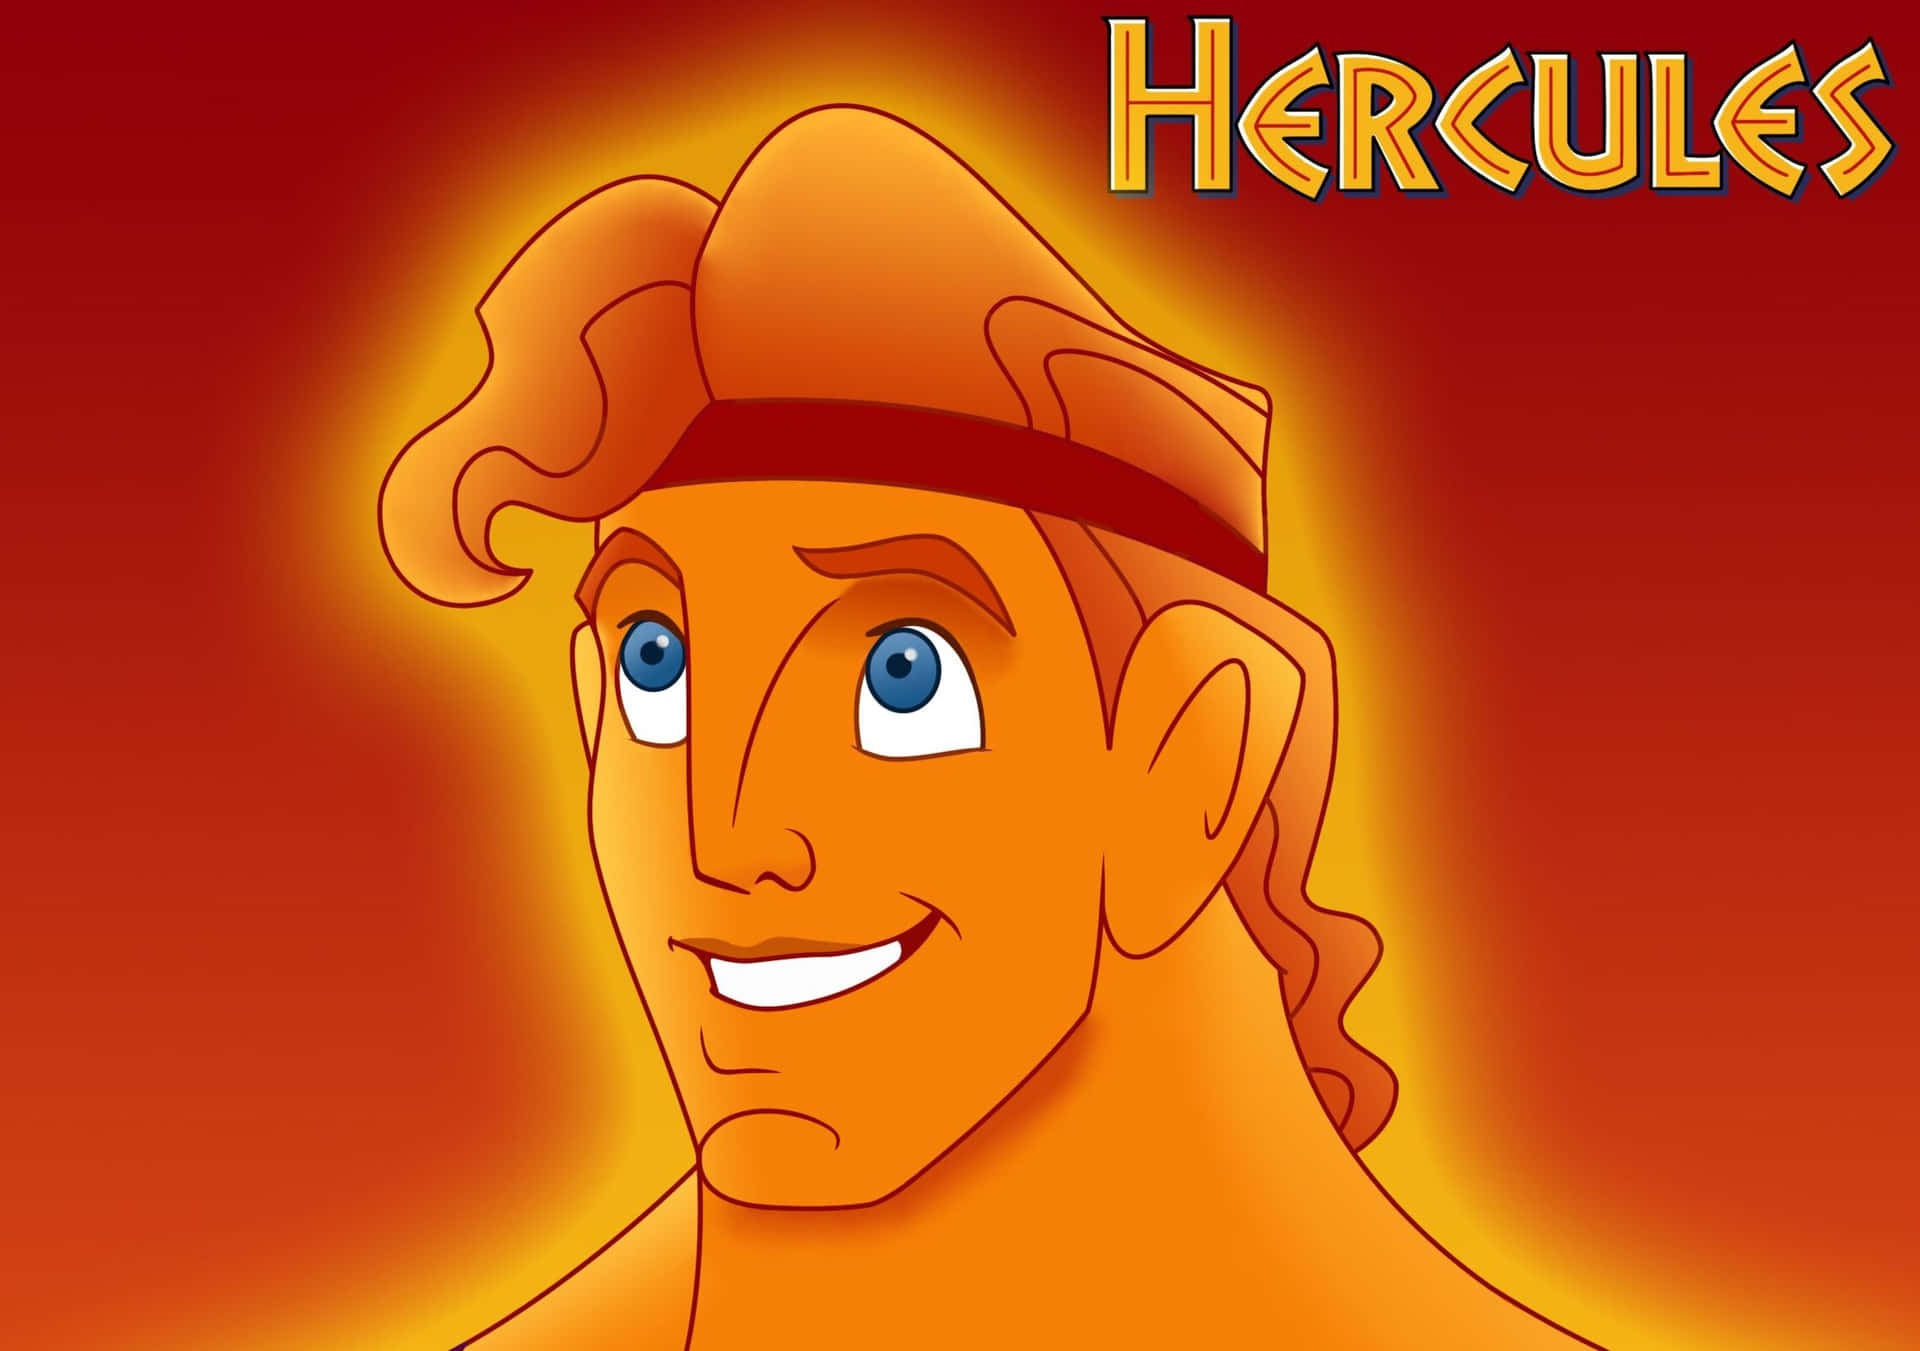 Hercules - Finished Projects - Blender Artists Community